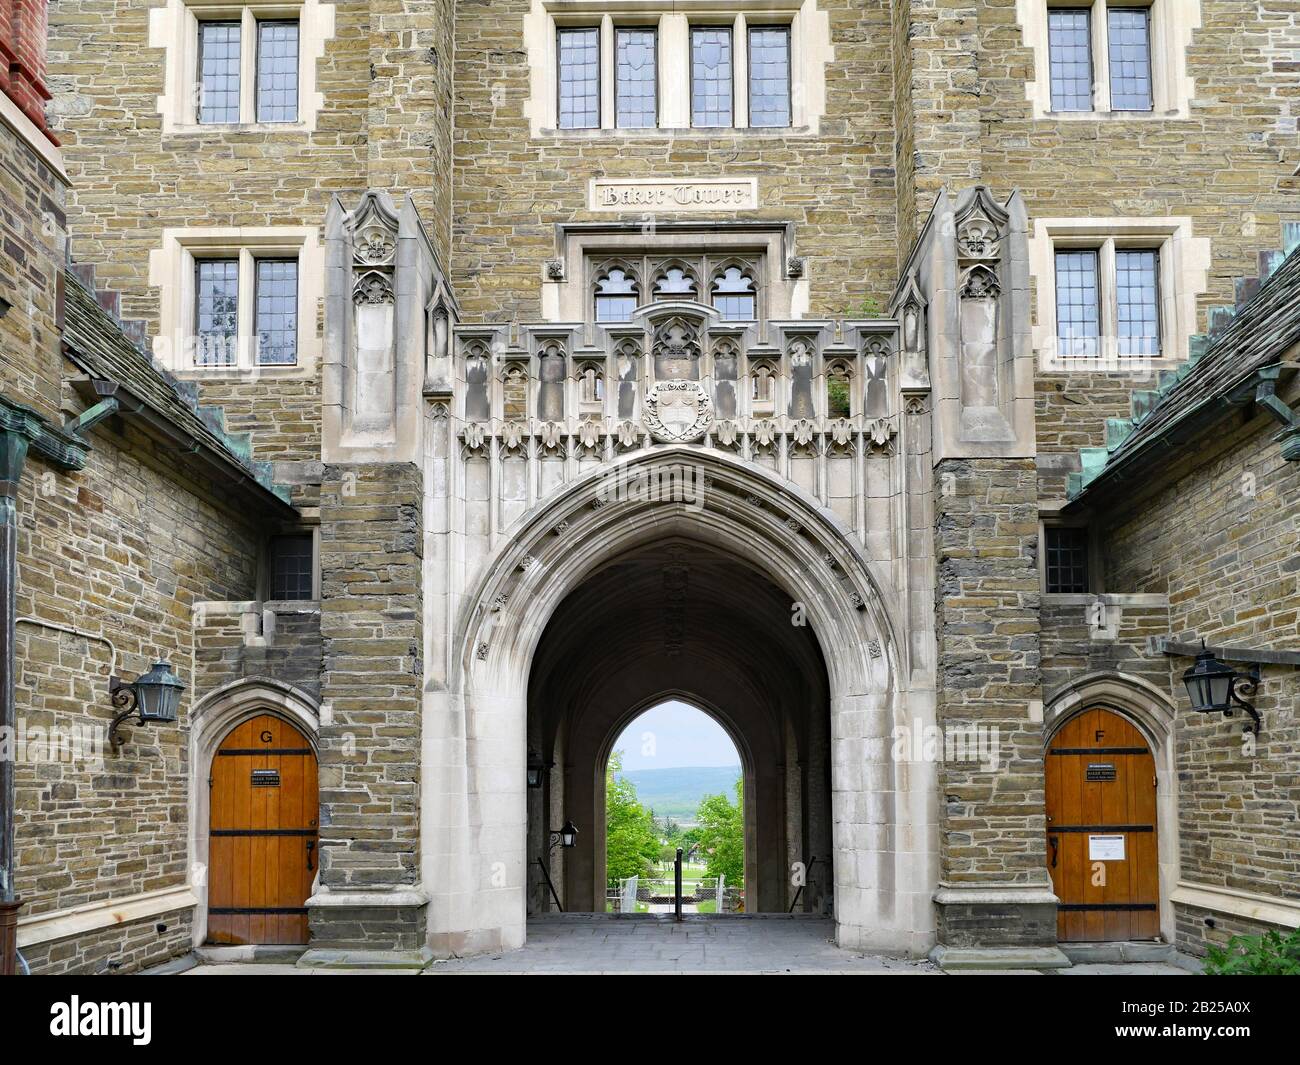 ITHACA, NY - MAY 2019:  Cornell University's campus has many elegant stone neogothic style buildings such as this residence hall named Baker Tower. Stock Photo